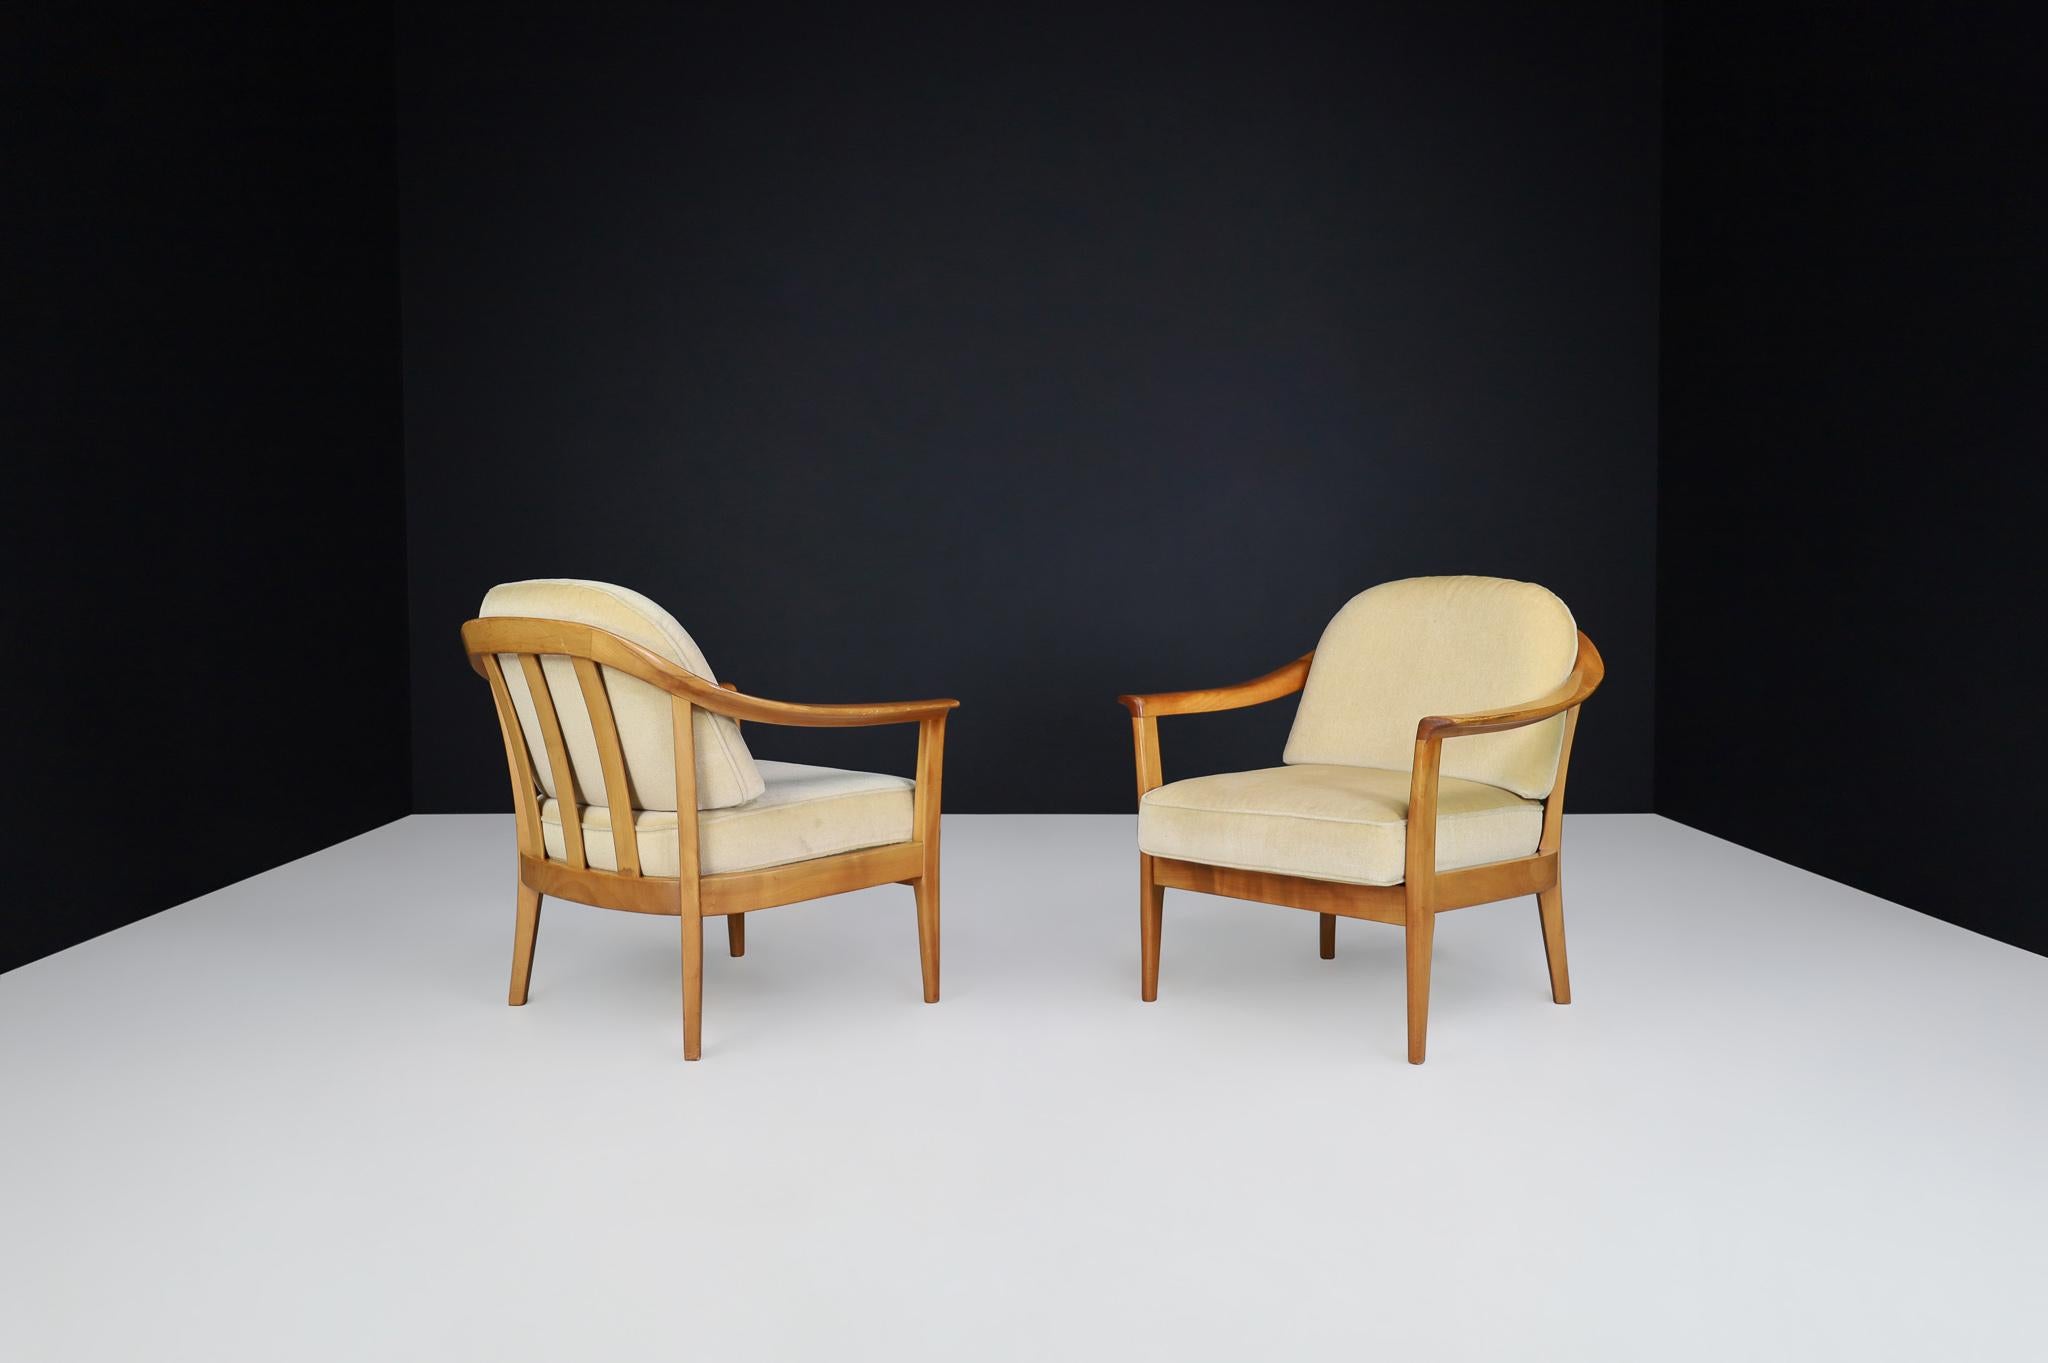 Fabric Wilhelm Knol Easy Chairs In Cherry and Original Upholstery, Germany 1960s For Sale